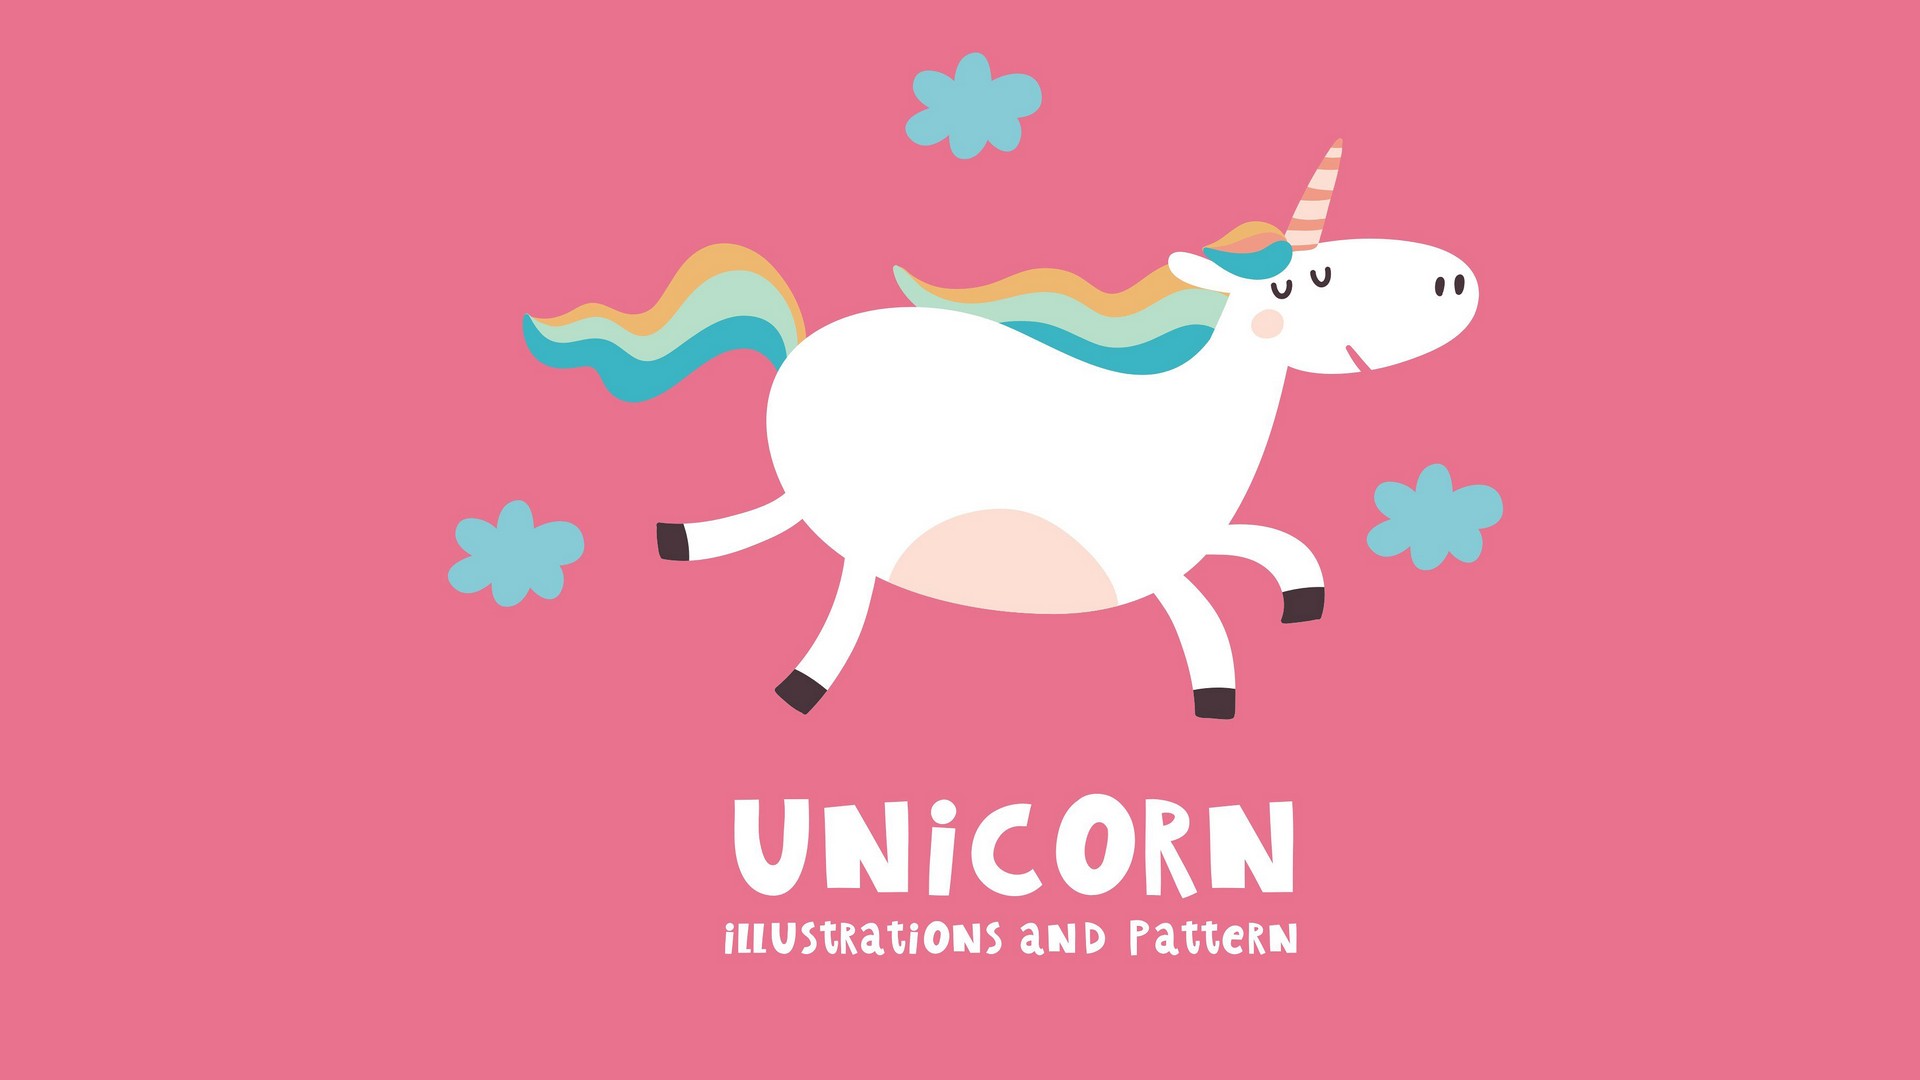 Cute Girly Unicorn Wallpaper For Desktop With high-resolution 1920X1080 pixel. You can use this wallpaper for your Windows and Mac OS computers as well as your Android and iPhone smartphones